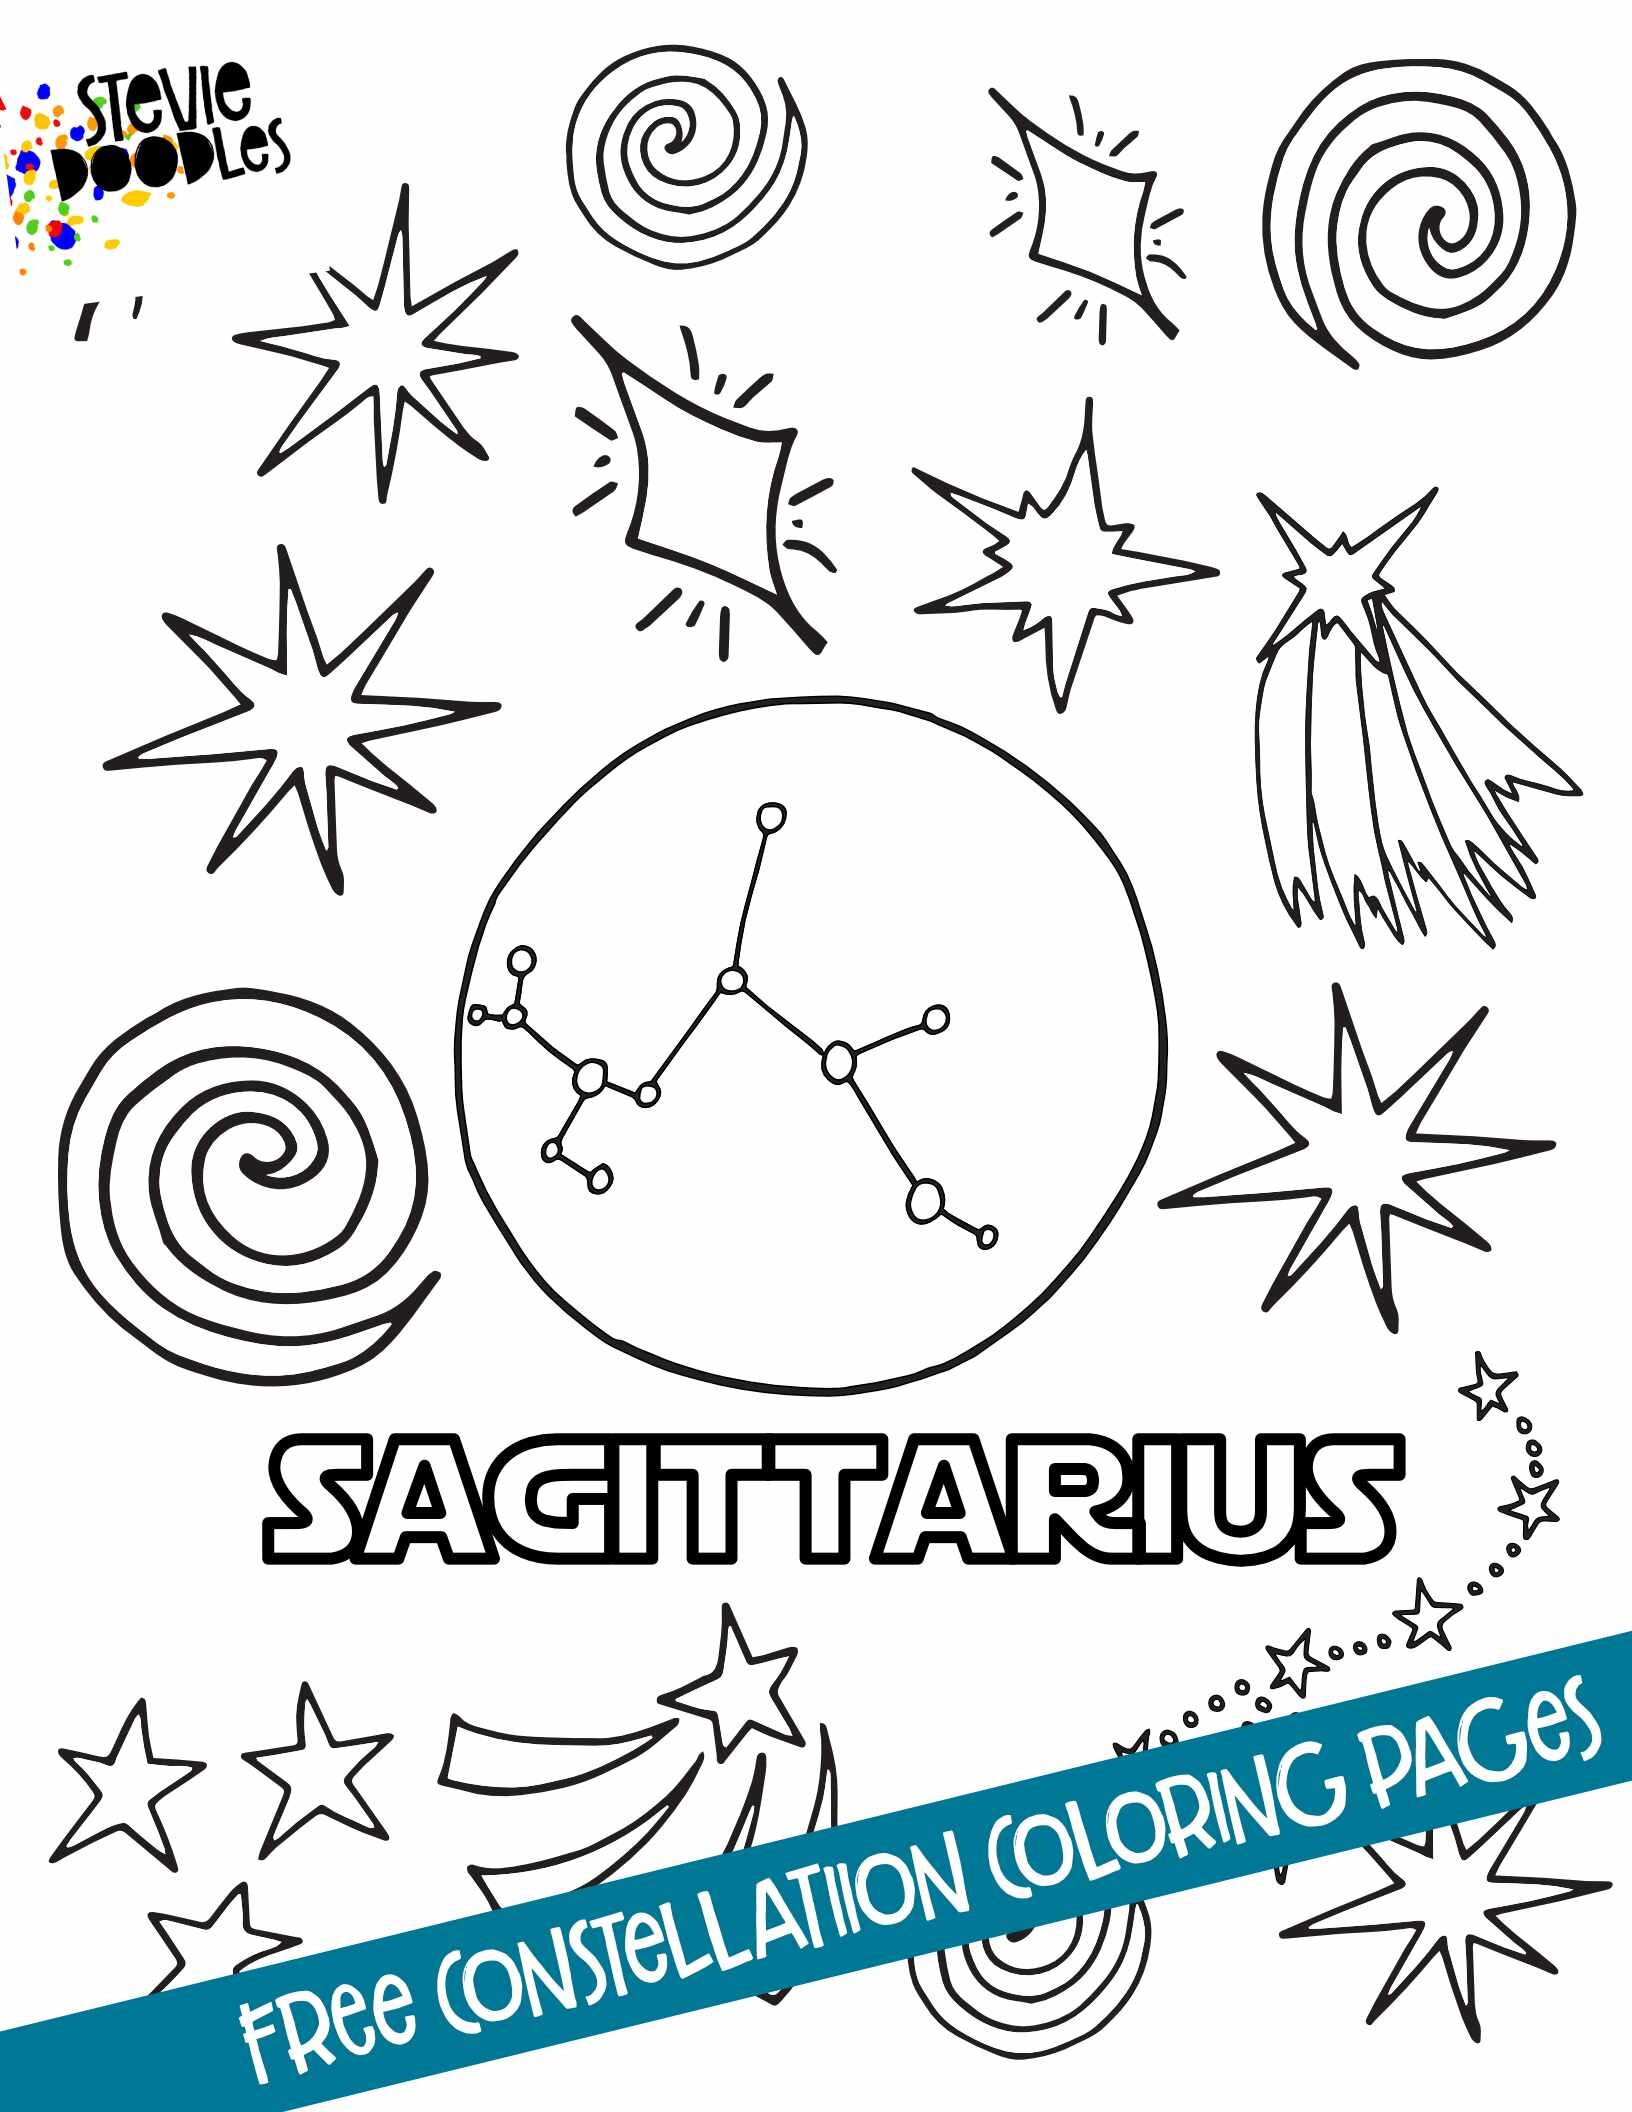 SAGITTARIUS - 12 Free Constellation Coloring Pages - Over 1000 Free Coloring Pages CLICK HERE TO PRINT THE PAGE ABOVE